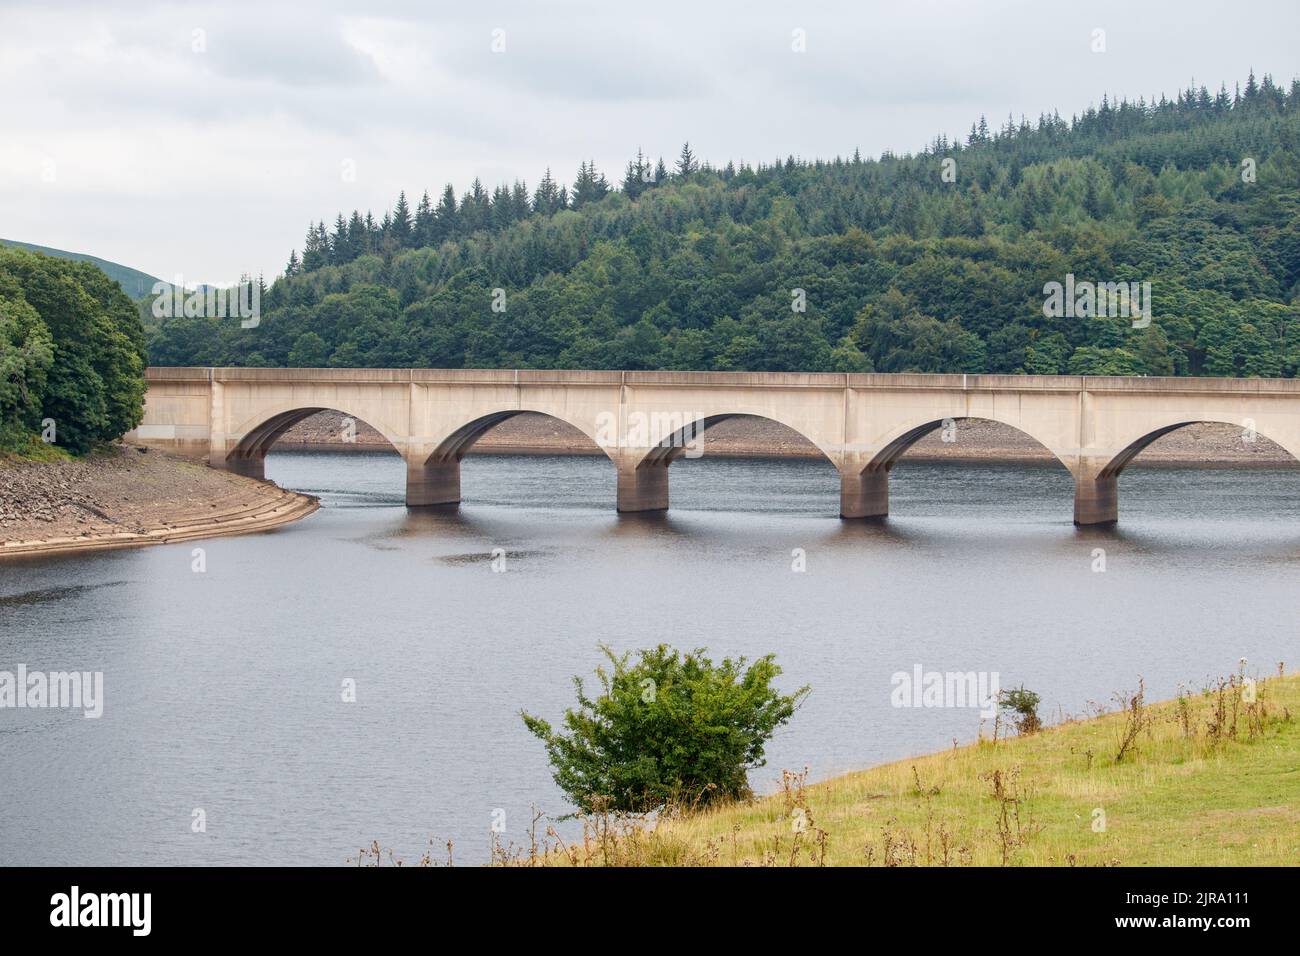 The Ladybower reservoir during the dry and drought weather in the summer of 2022.. The picture shows the view to the Ashopton bridge where the A57 crosses, the marks on the bridge showing the usual water level. Ladybower Reservoir is a large Y-shaped, artificial reservoir, the lowest of three in the Upper Derwent Valley in Derbyshire, England. Stock Photo